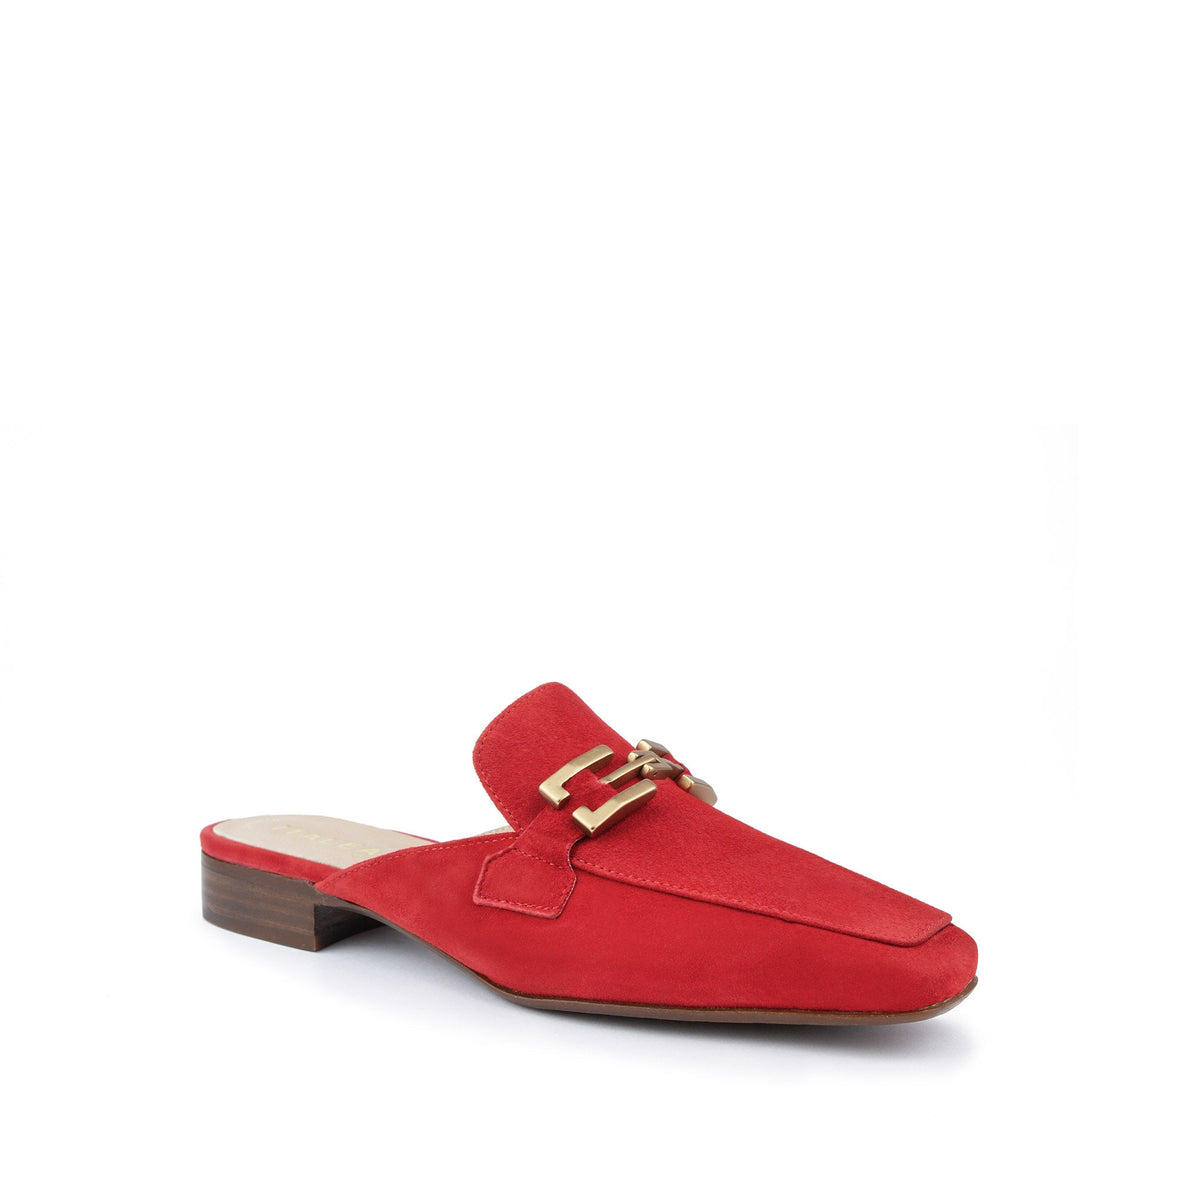 Italeau Cecile mules look great with everything and are made in Italy